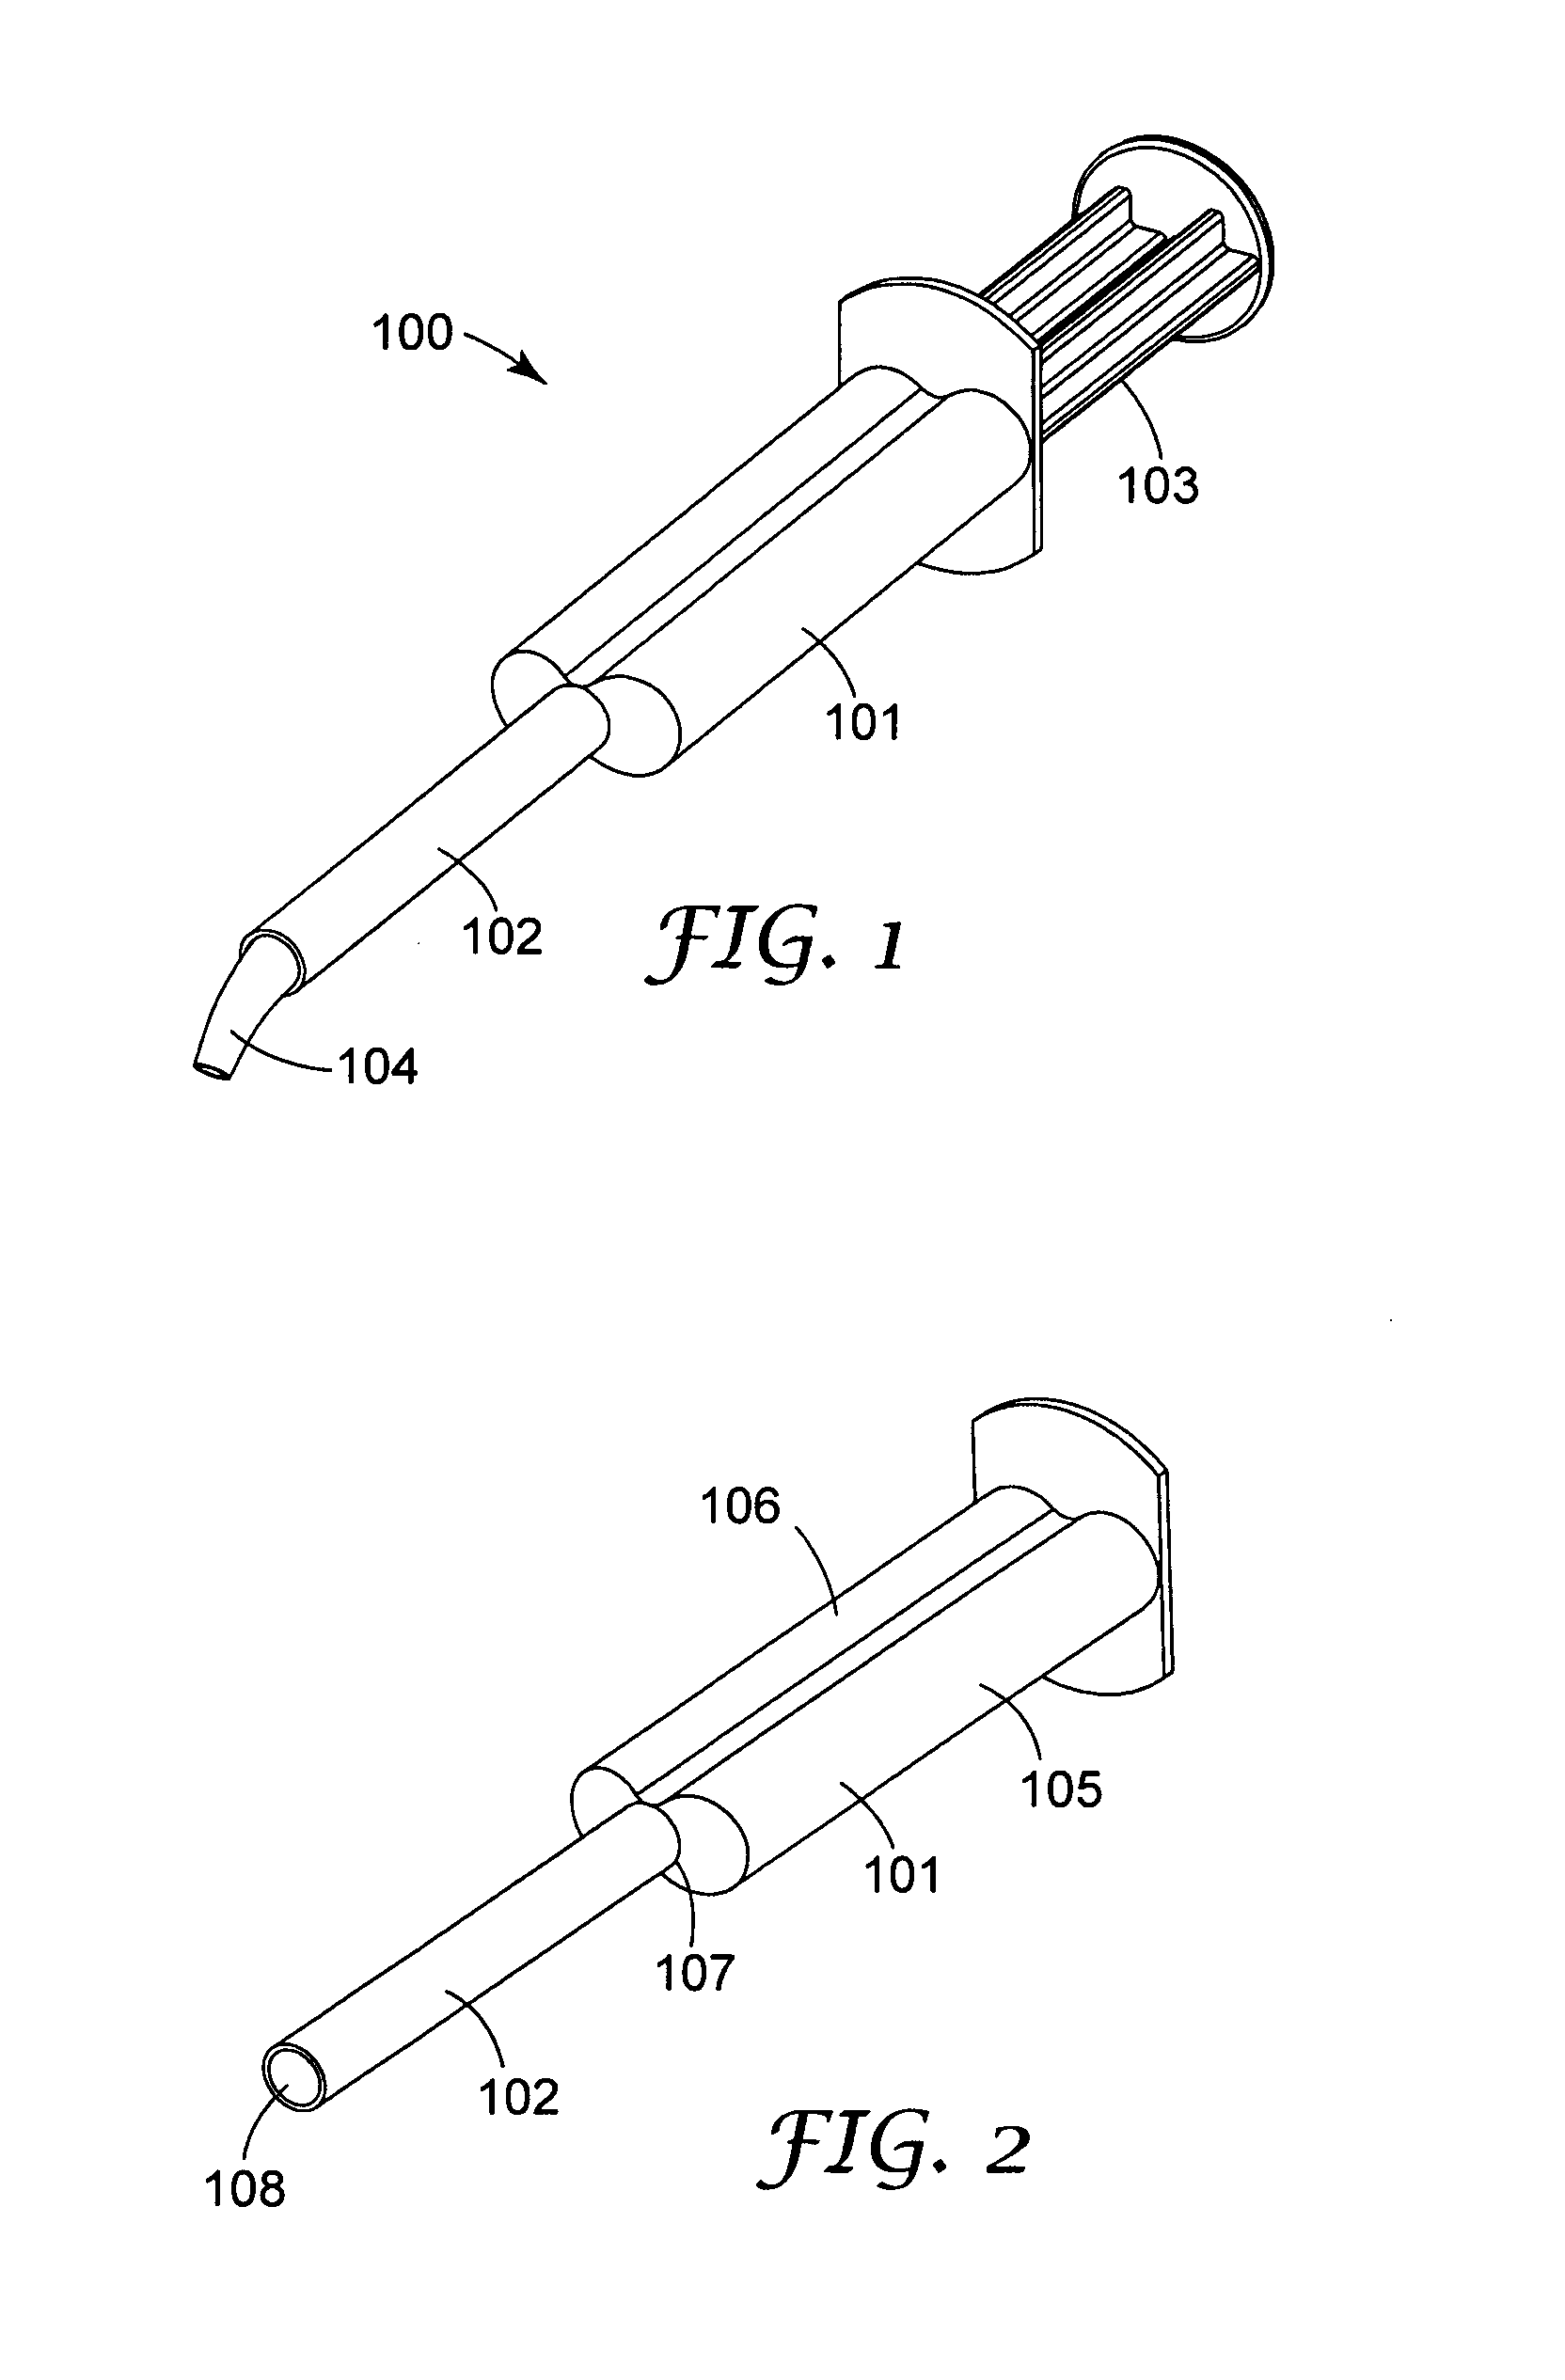 Unit-dose syringe for a multi-component material